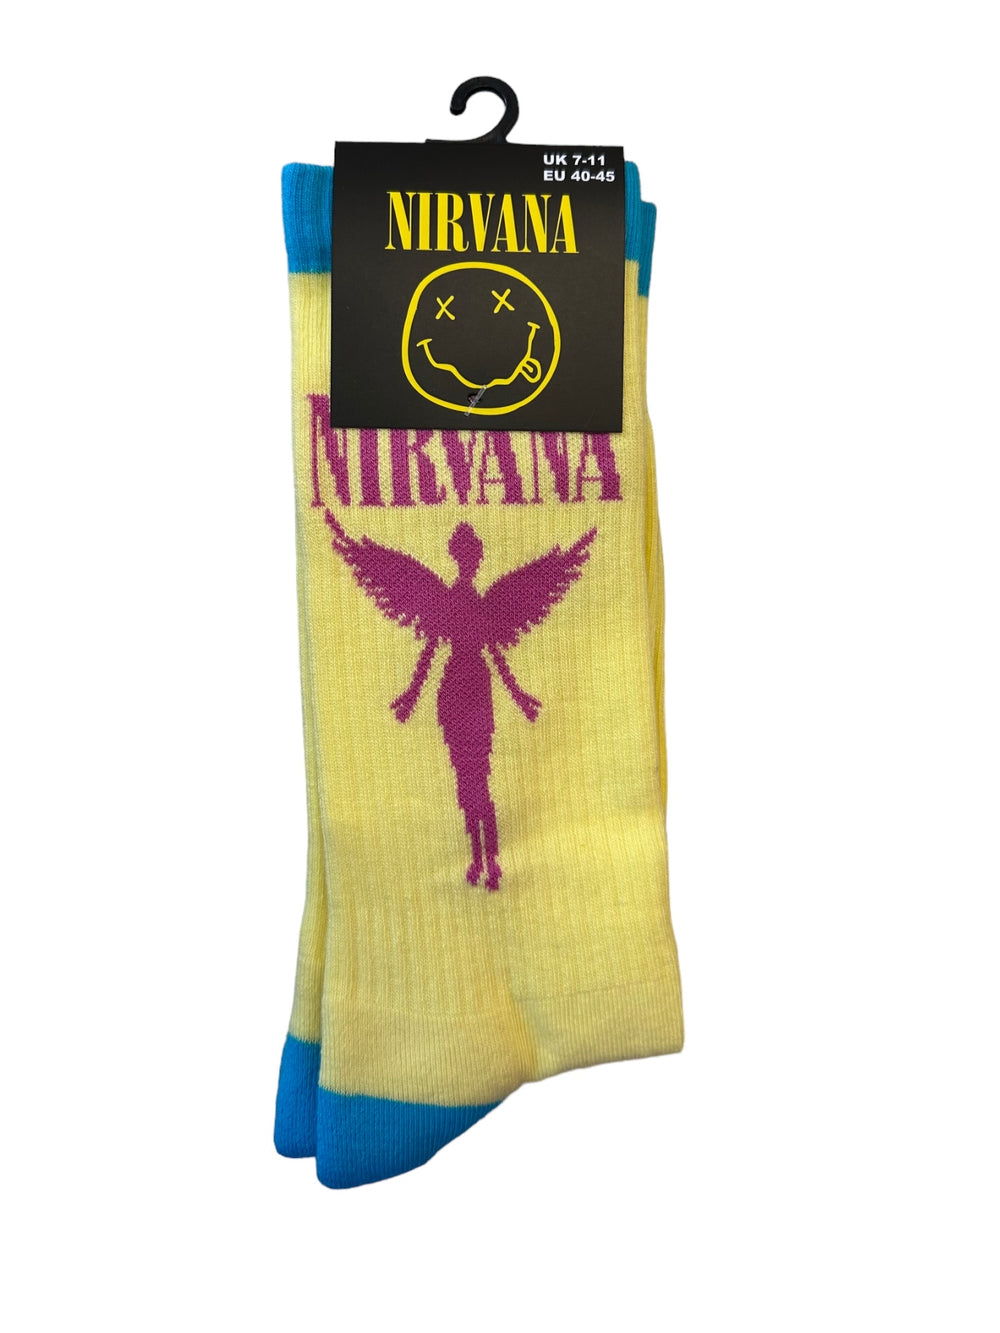 Nirvana Angelic YELL Official Product 1 Pair Jacquard Socks Brand New